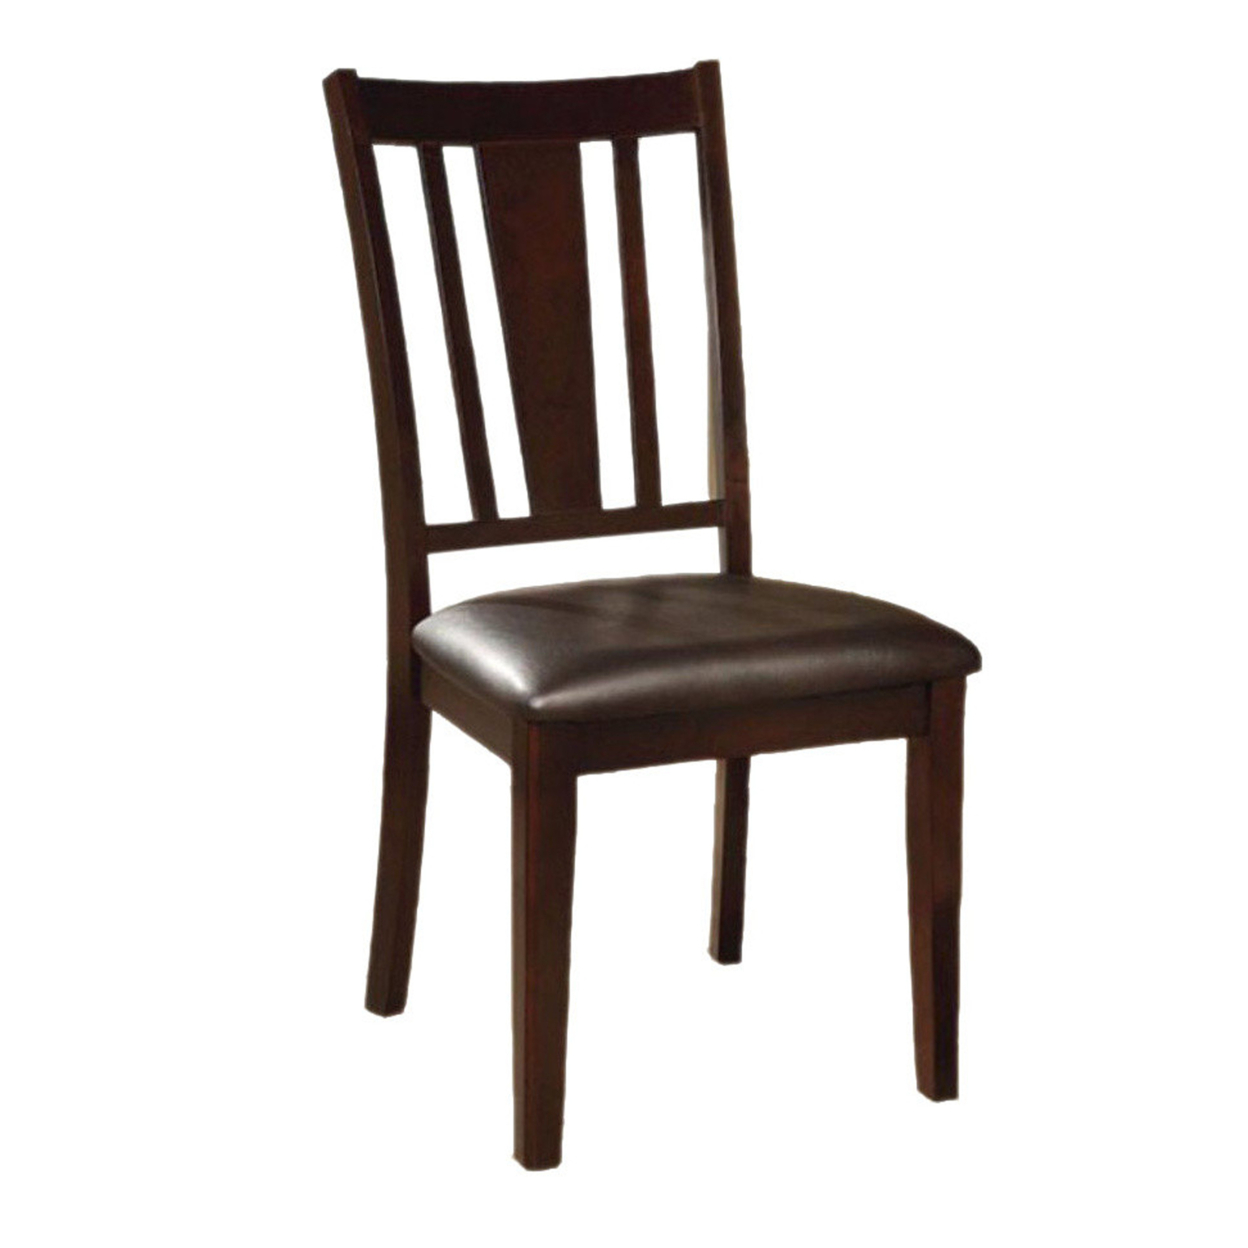 Leatherette Wooden Side Chair With Slatted Back, Set Of 2, Espresso Brown- Saltoro Sherpi